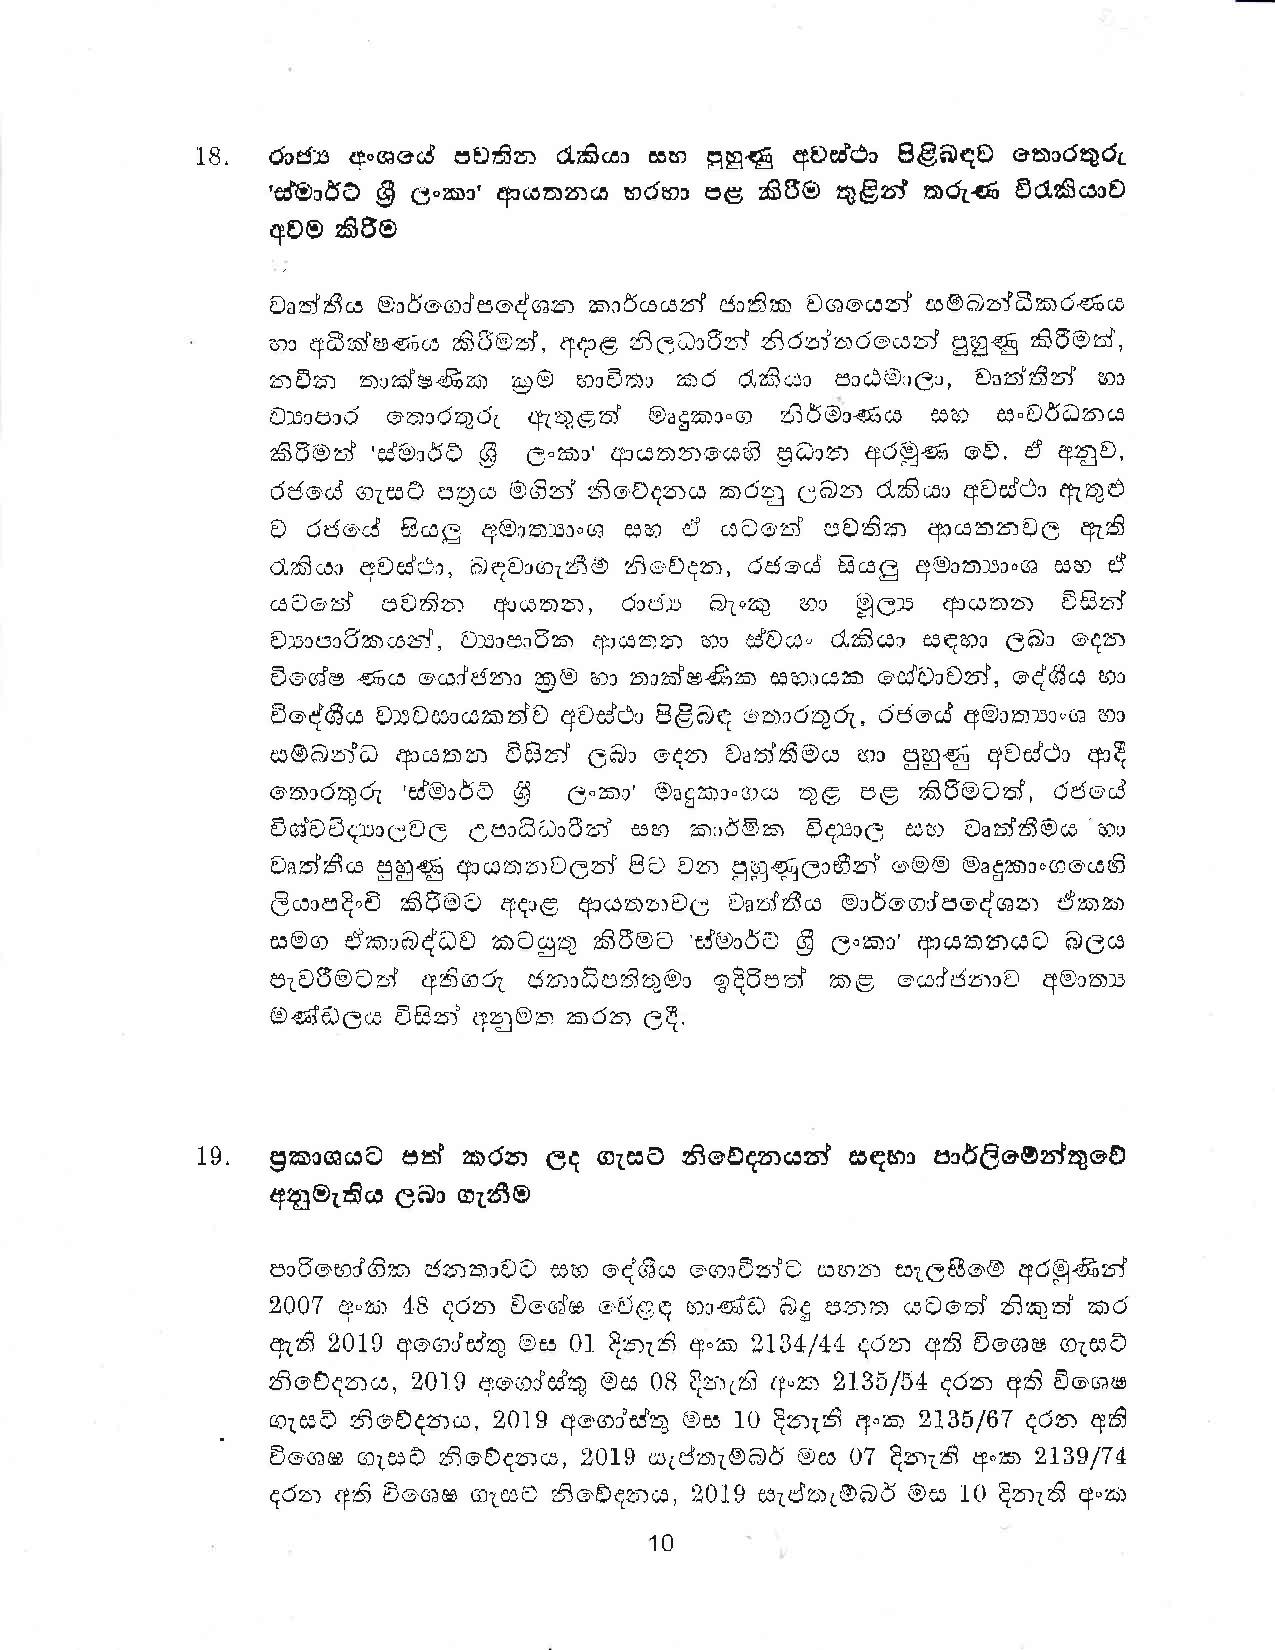 Cabinet Decision on 15.10.2019 page 010